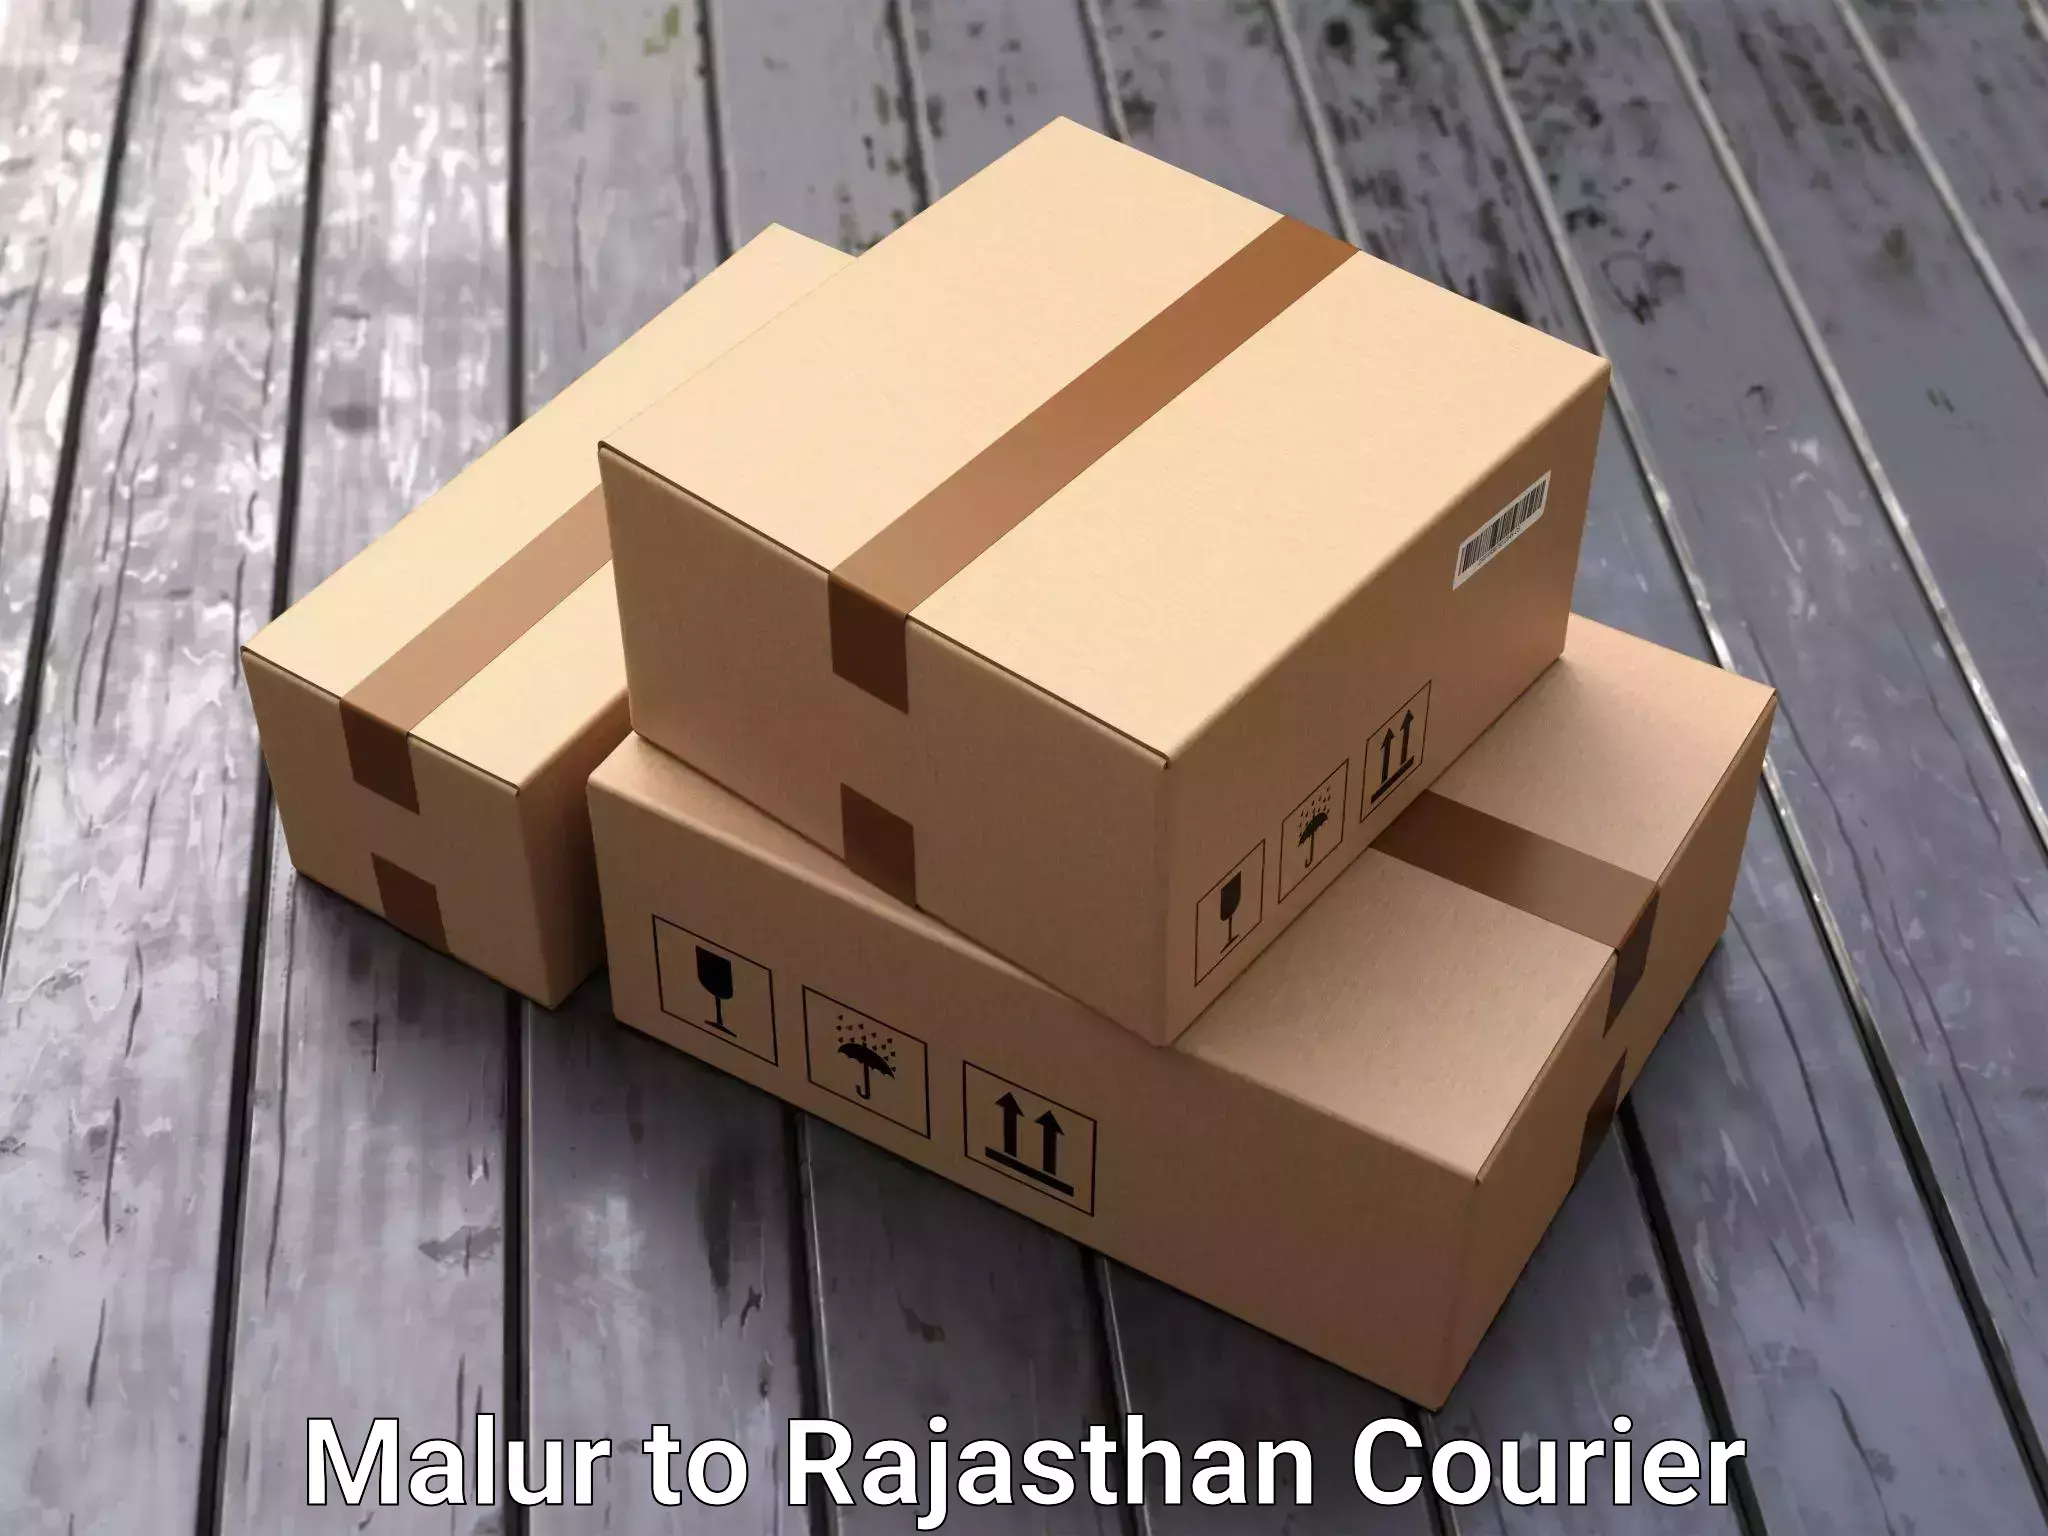 Professional movers and packers in Malur to Nagar